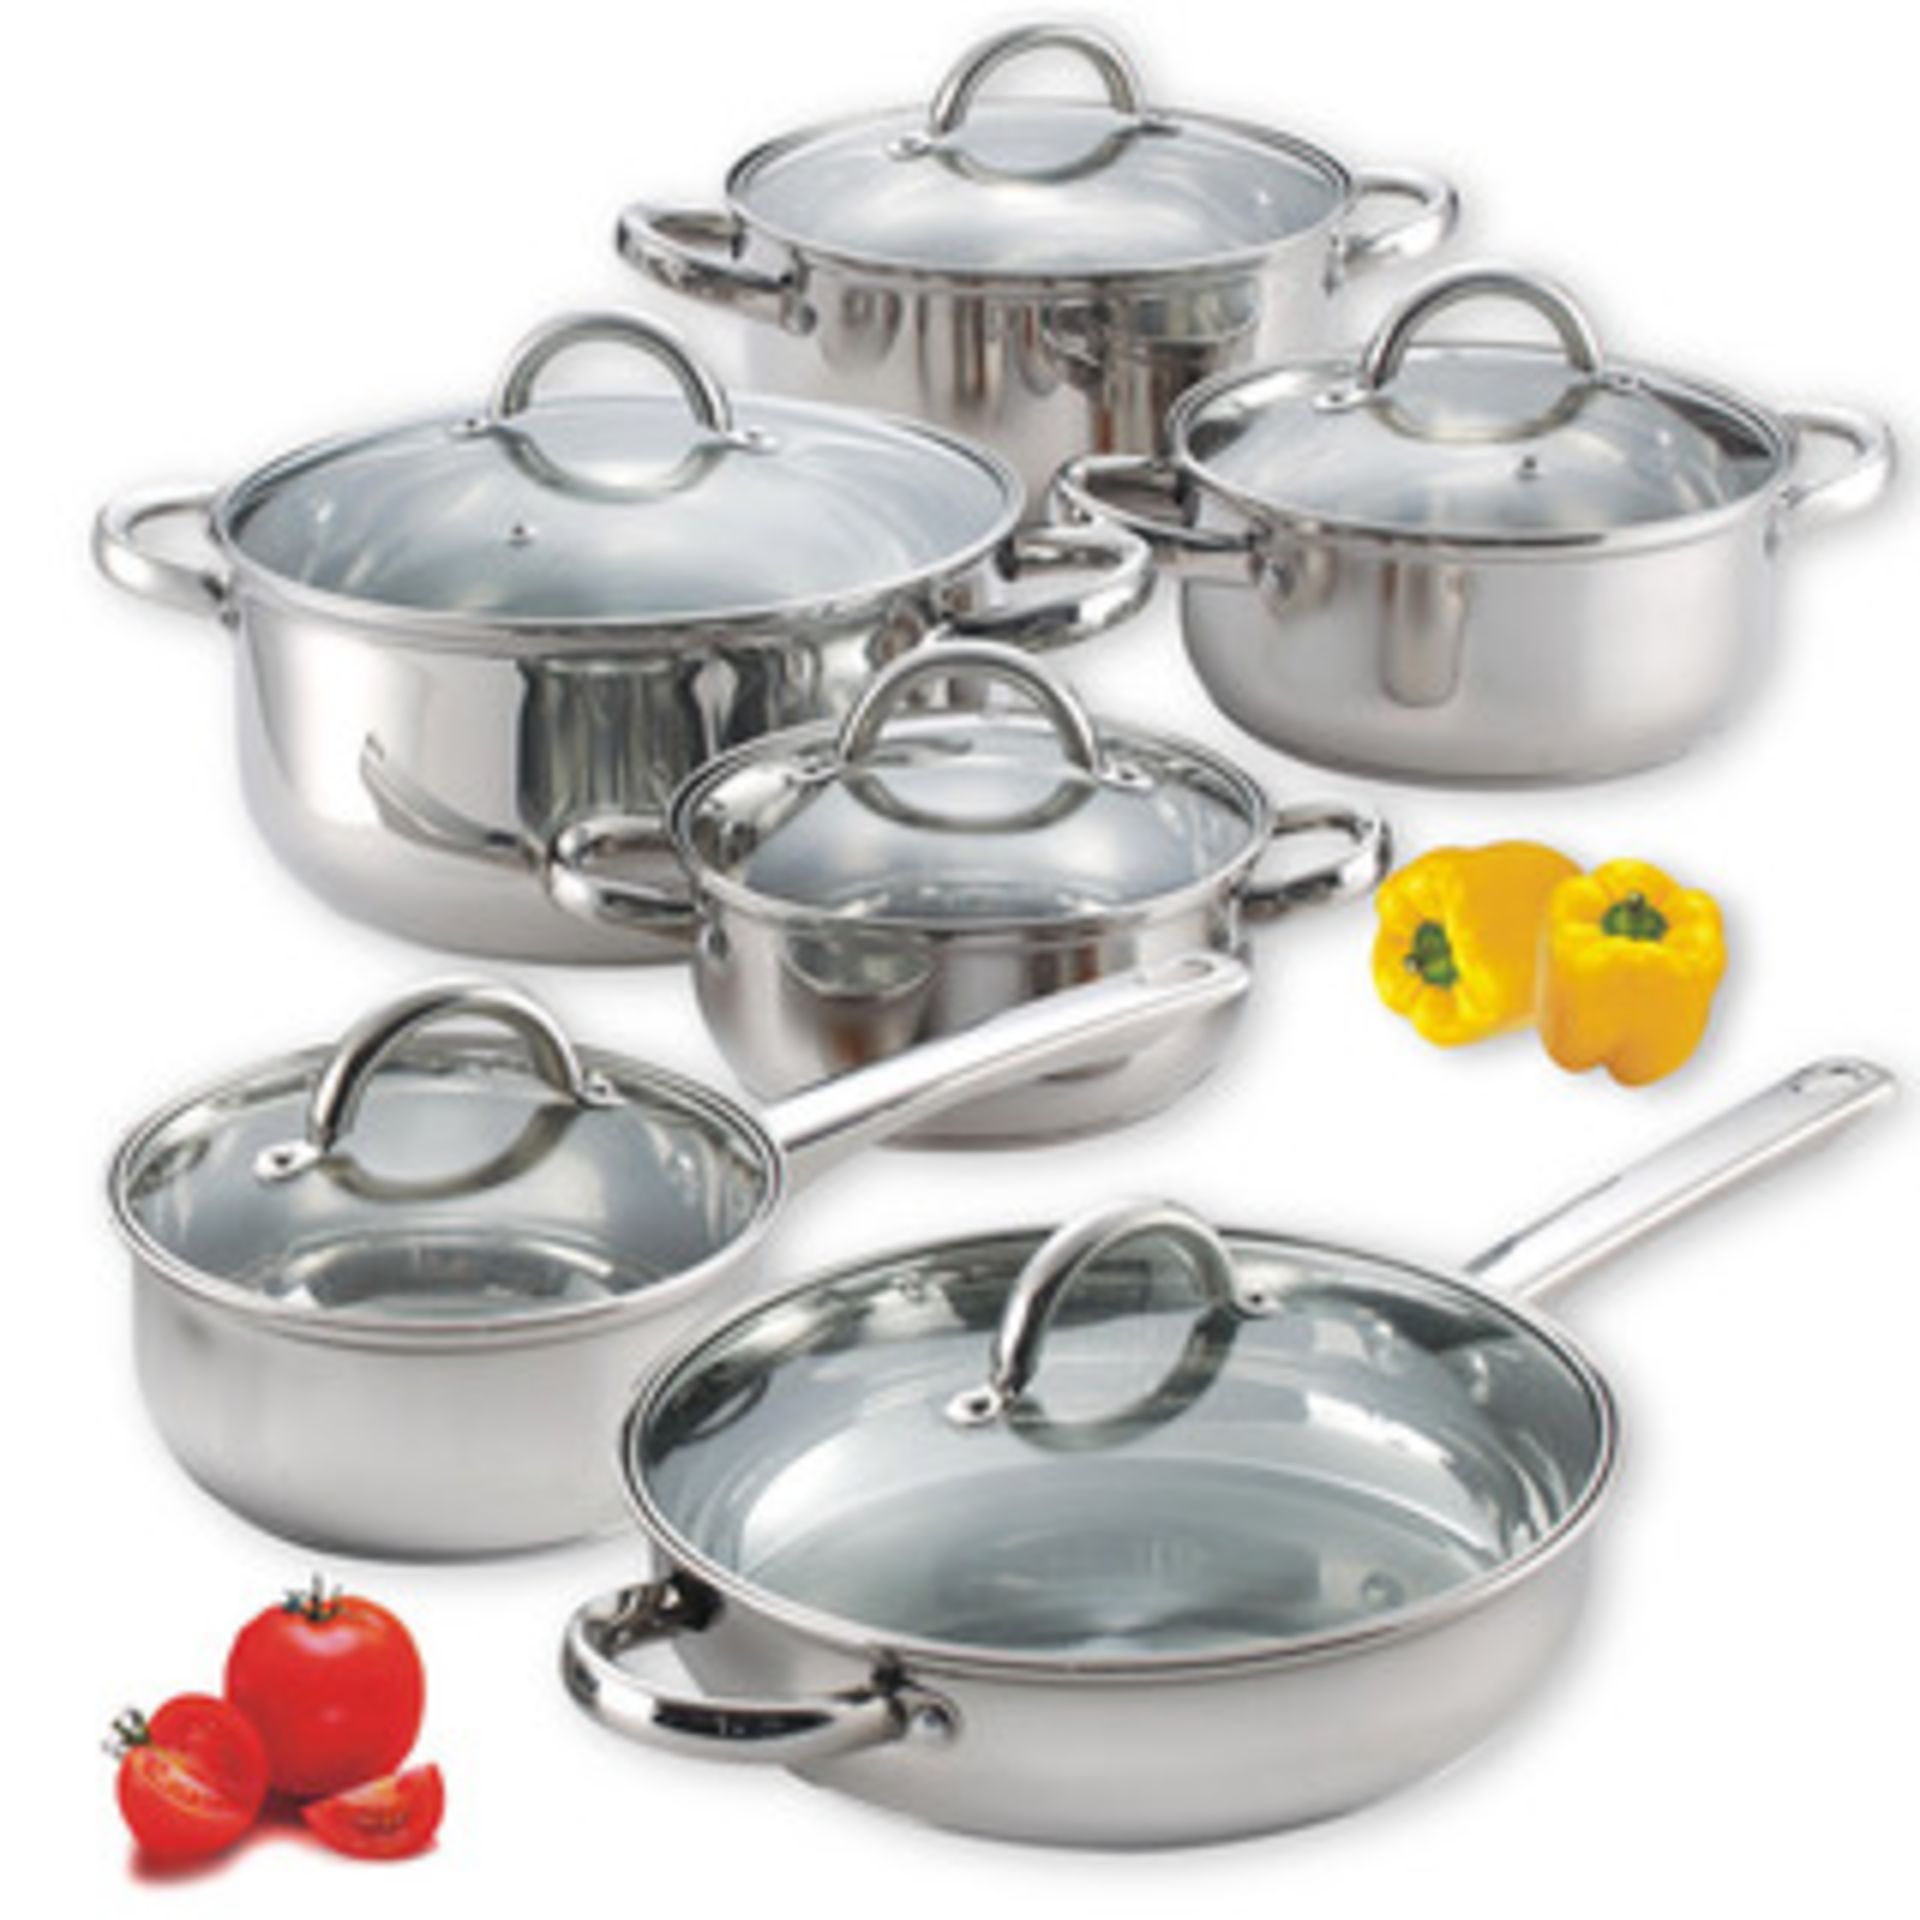 V Brand New 12 Piece Professional Stainless Steel Cookware Set With Stainless Steel Lids RRP£199.